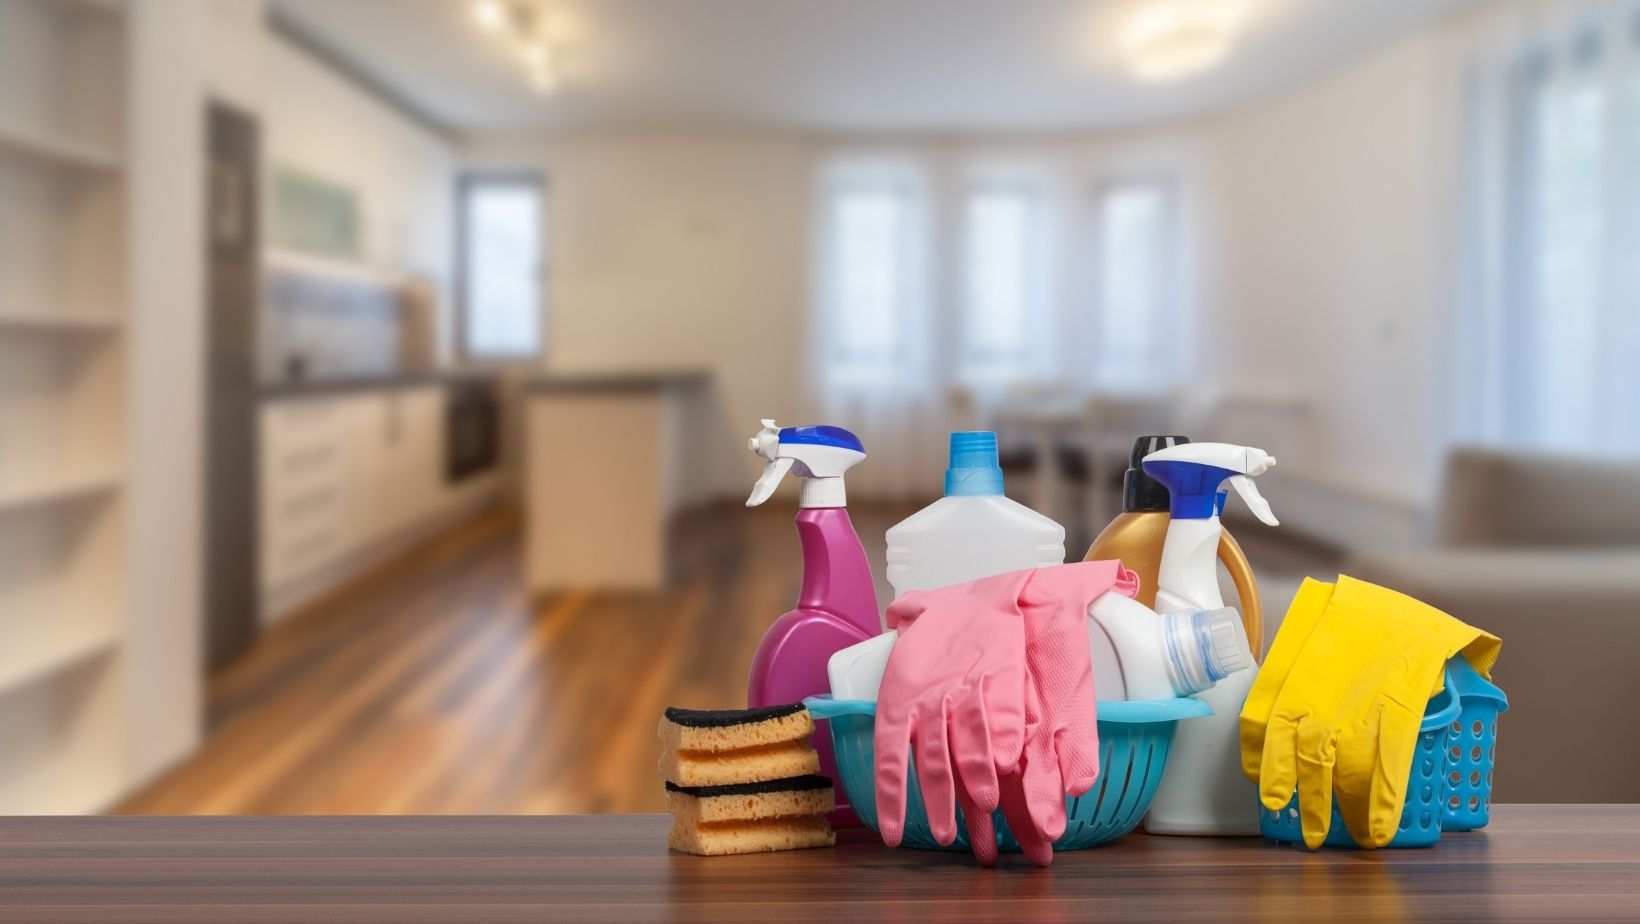 Google’s Best-Rated Cleaning Services in Singapore